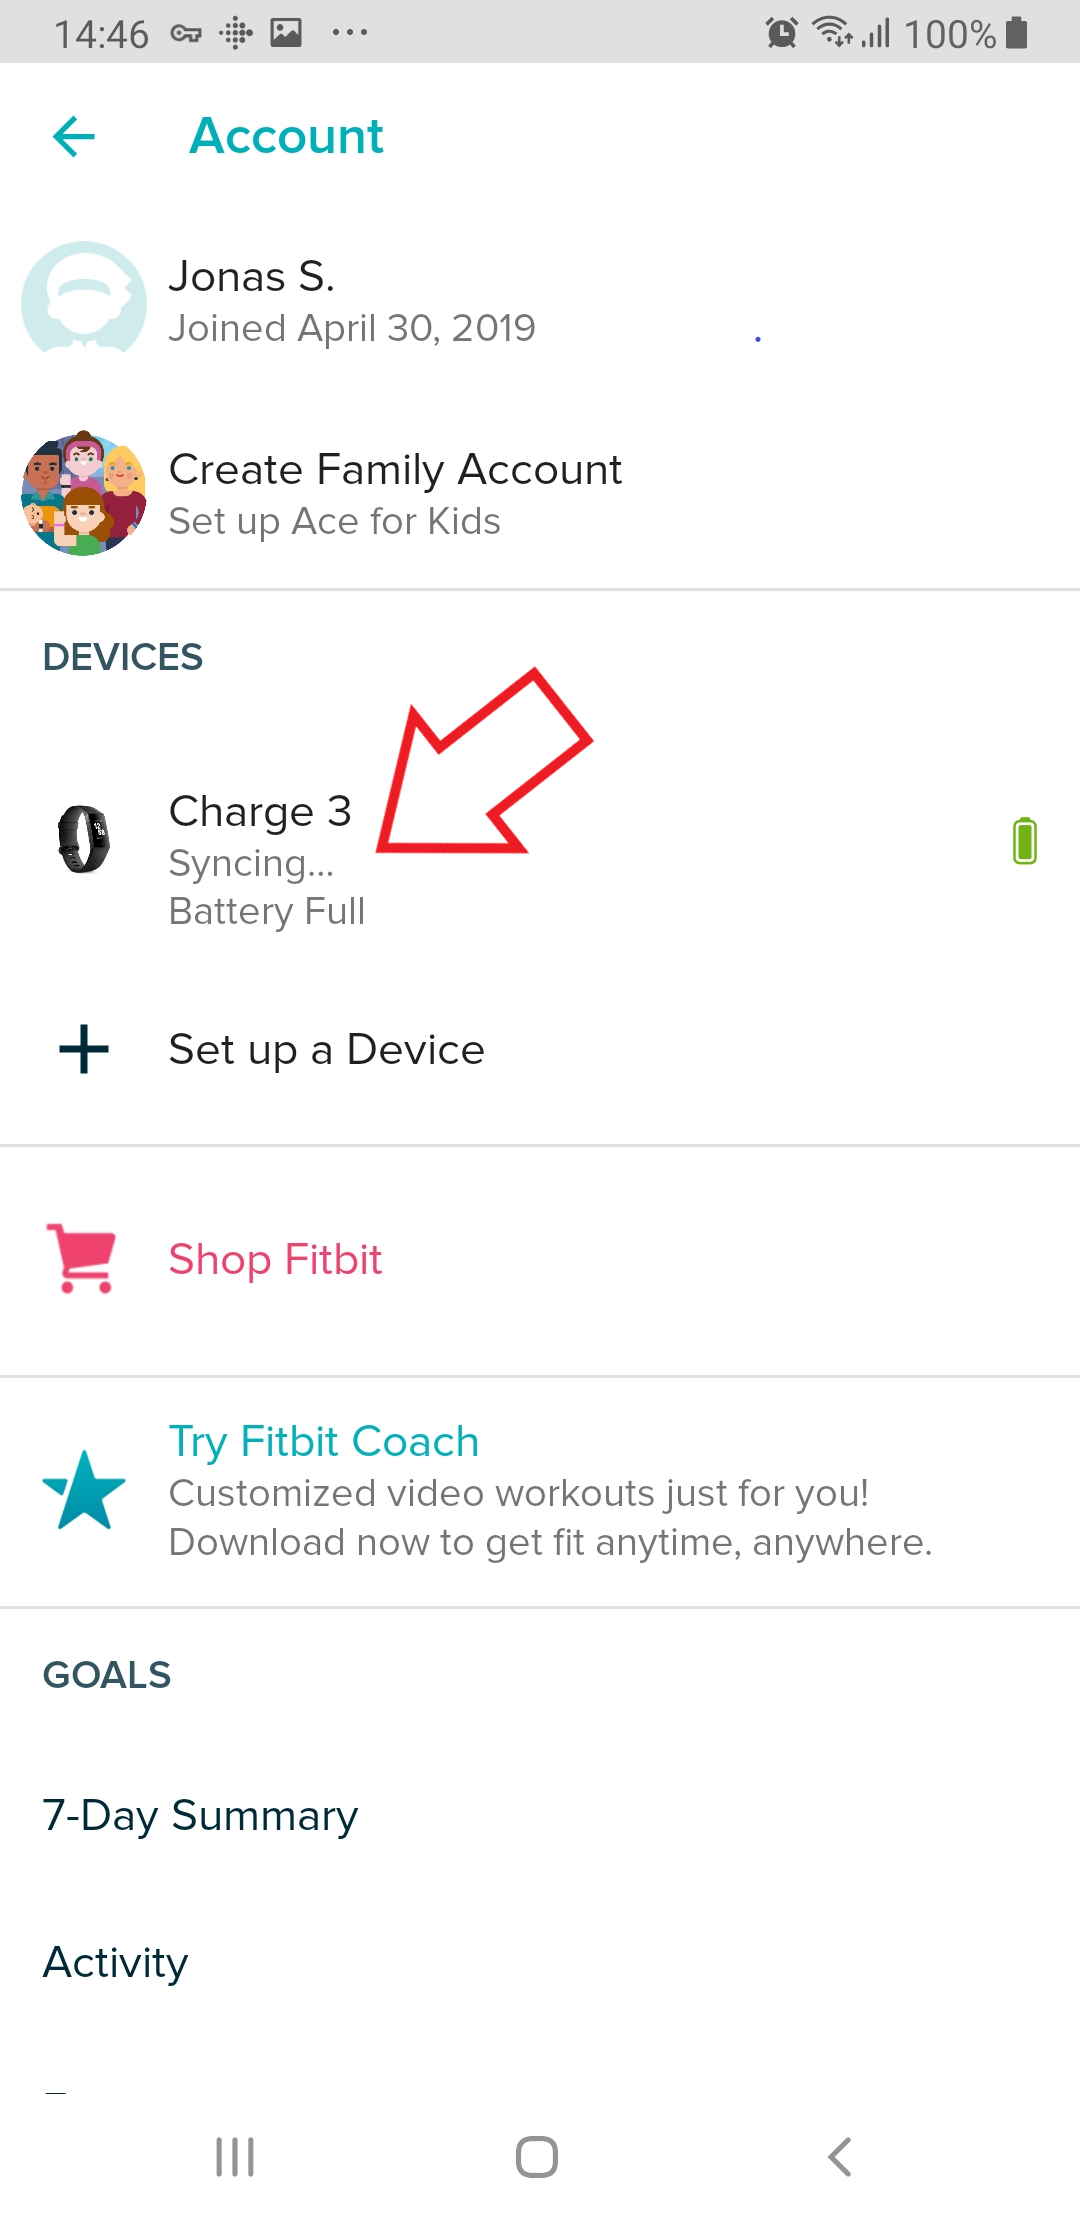 how to set silent alarm on fitbit versa